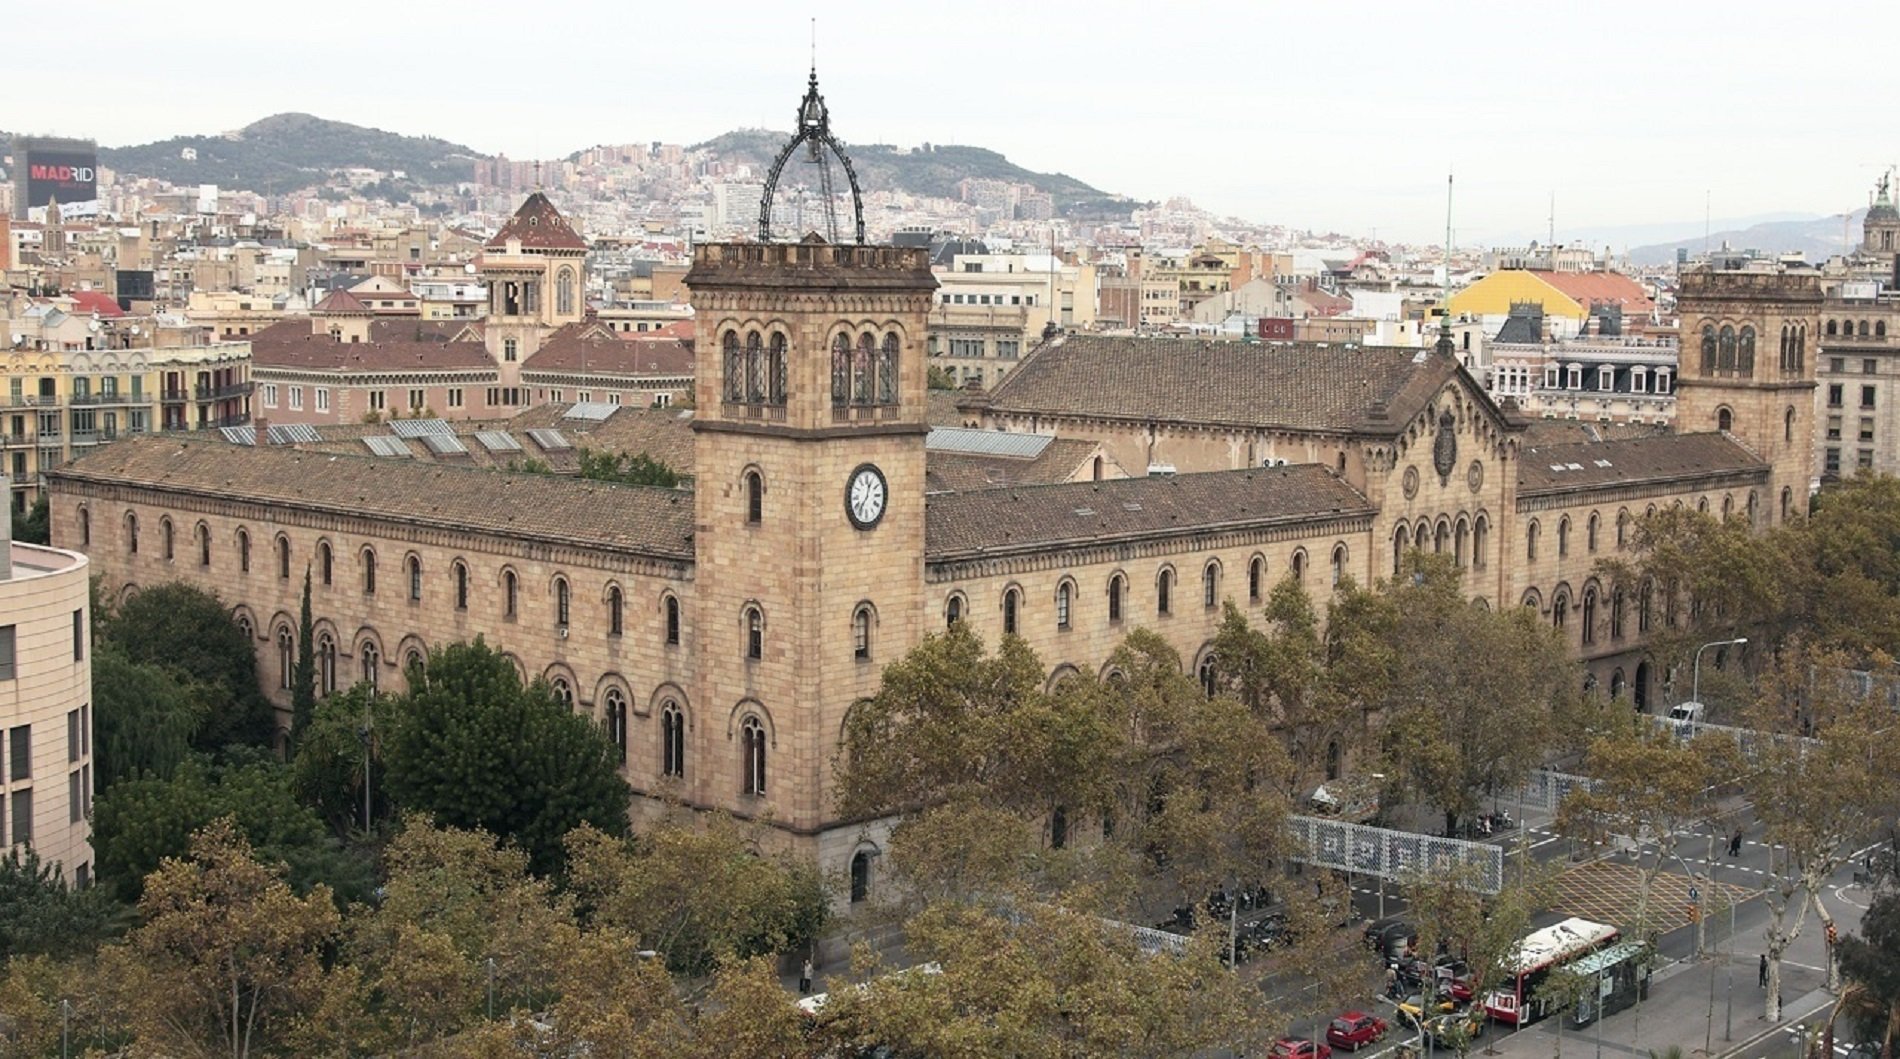 University of Barcelona breached rights by speaking out on 2019 verdicts, says court